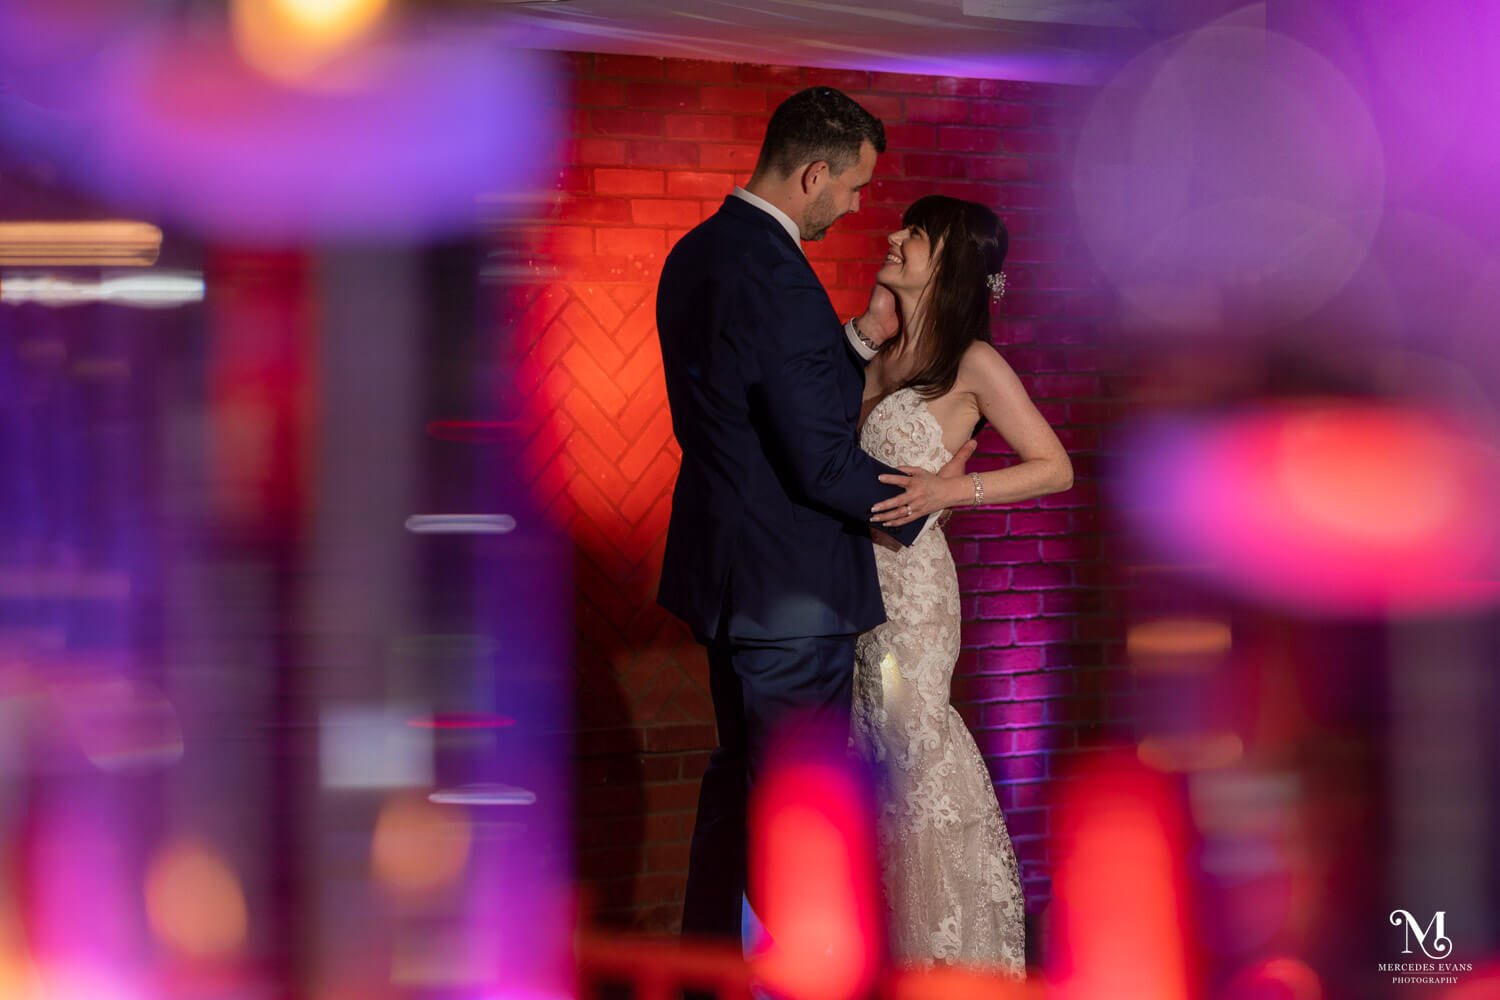 an evening photo of the bride and groom laughing as they embrace, with purple and red lights in the foreground